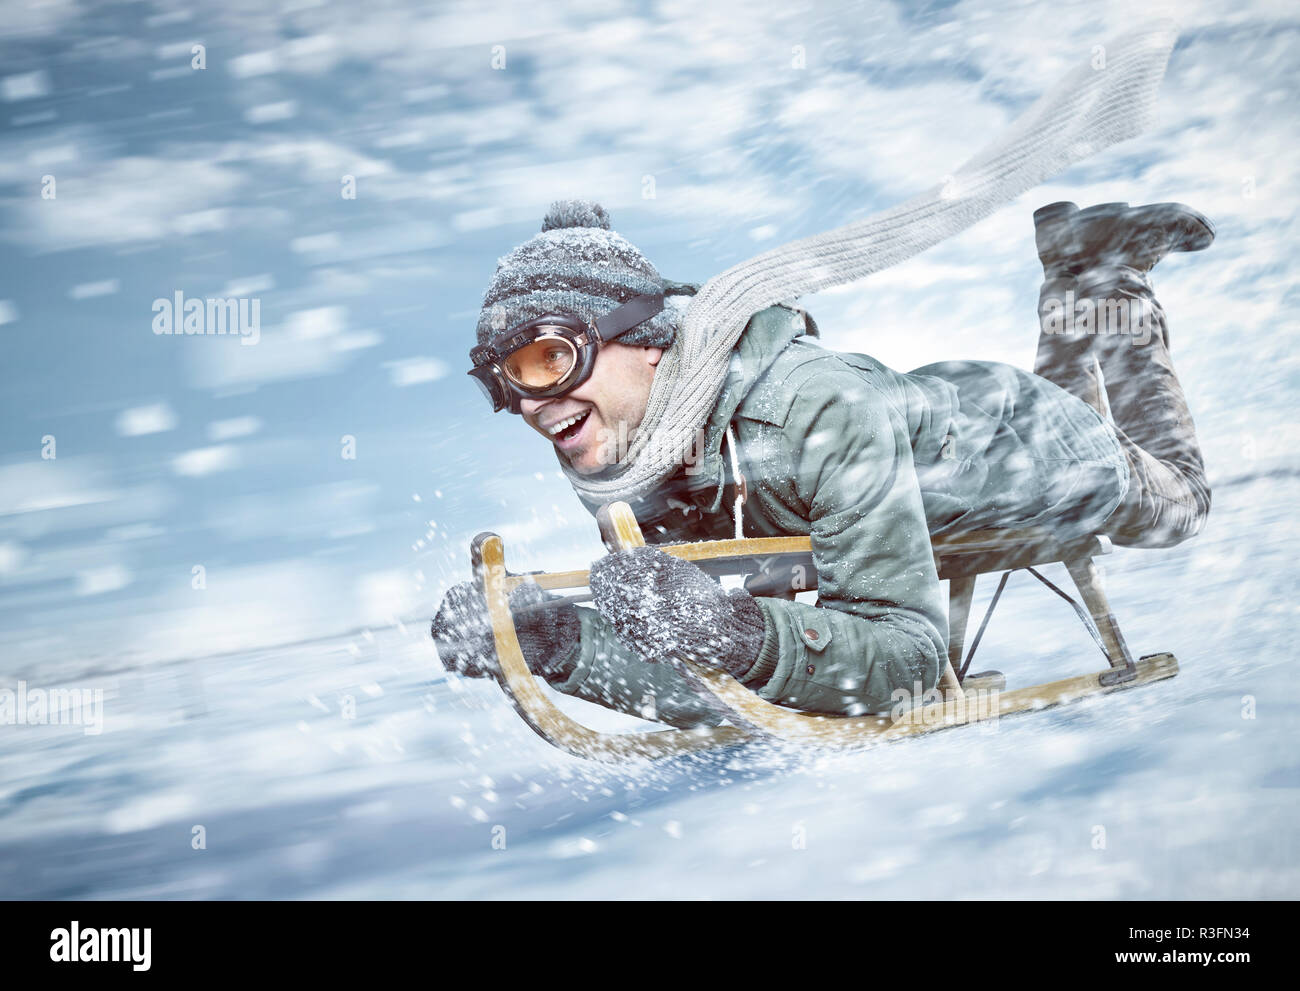 Cheerful man sledging down a snowy slope in full speed Stock Photo